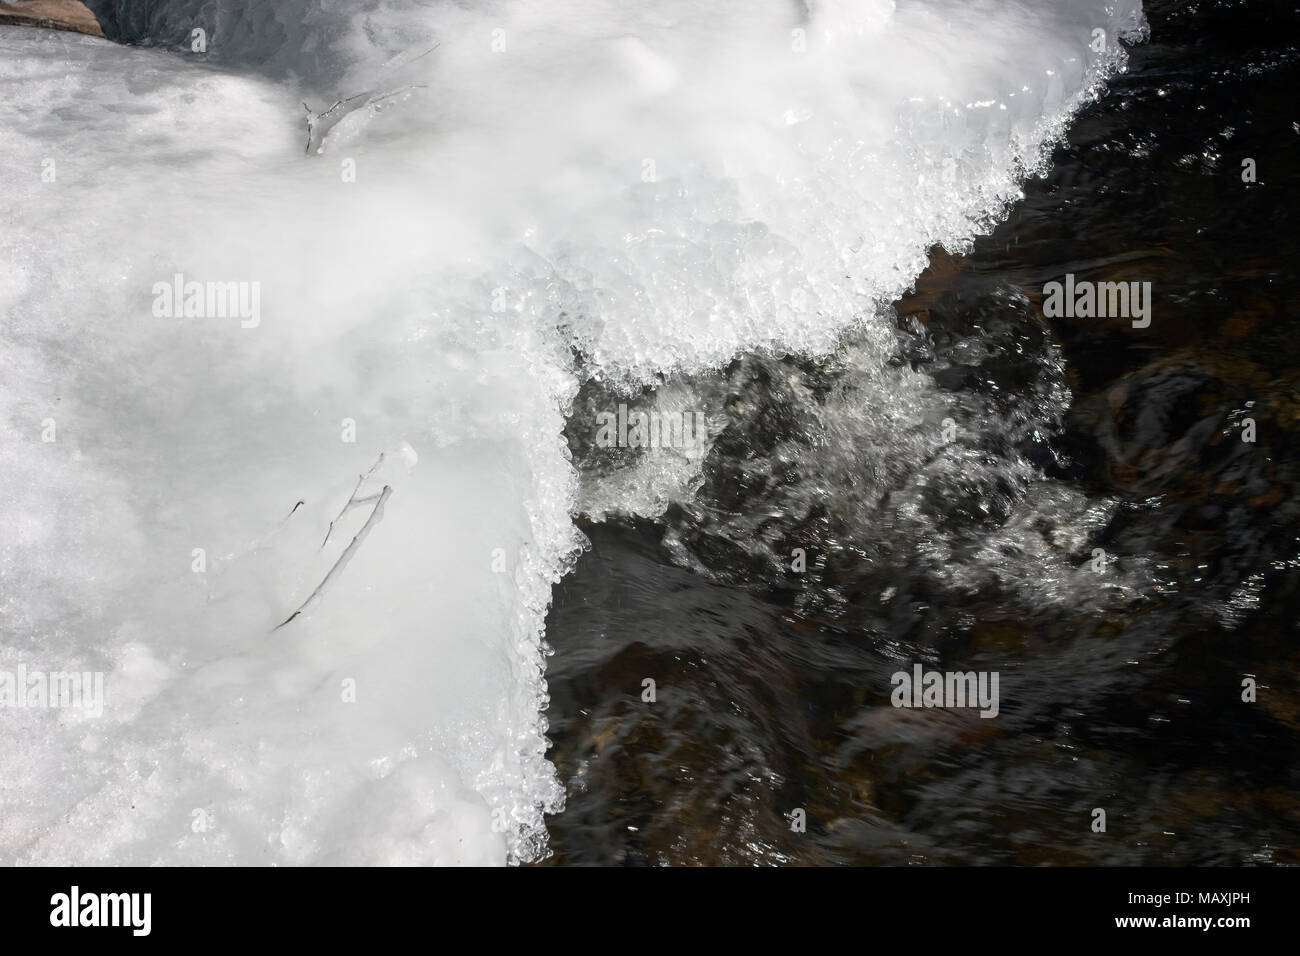 Ice and flowing river, Finland Stock Photo